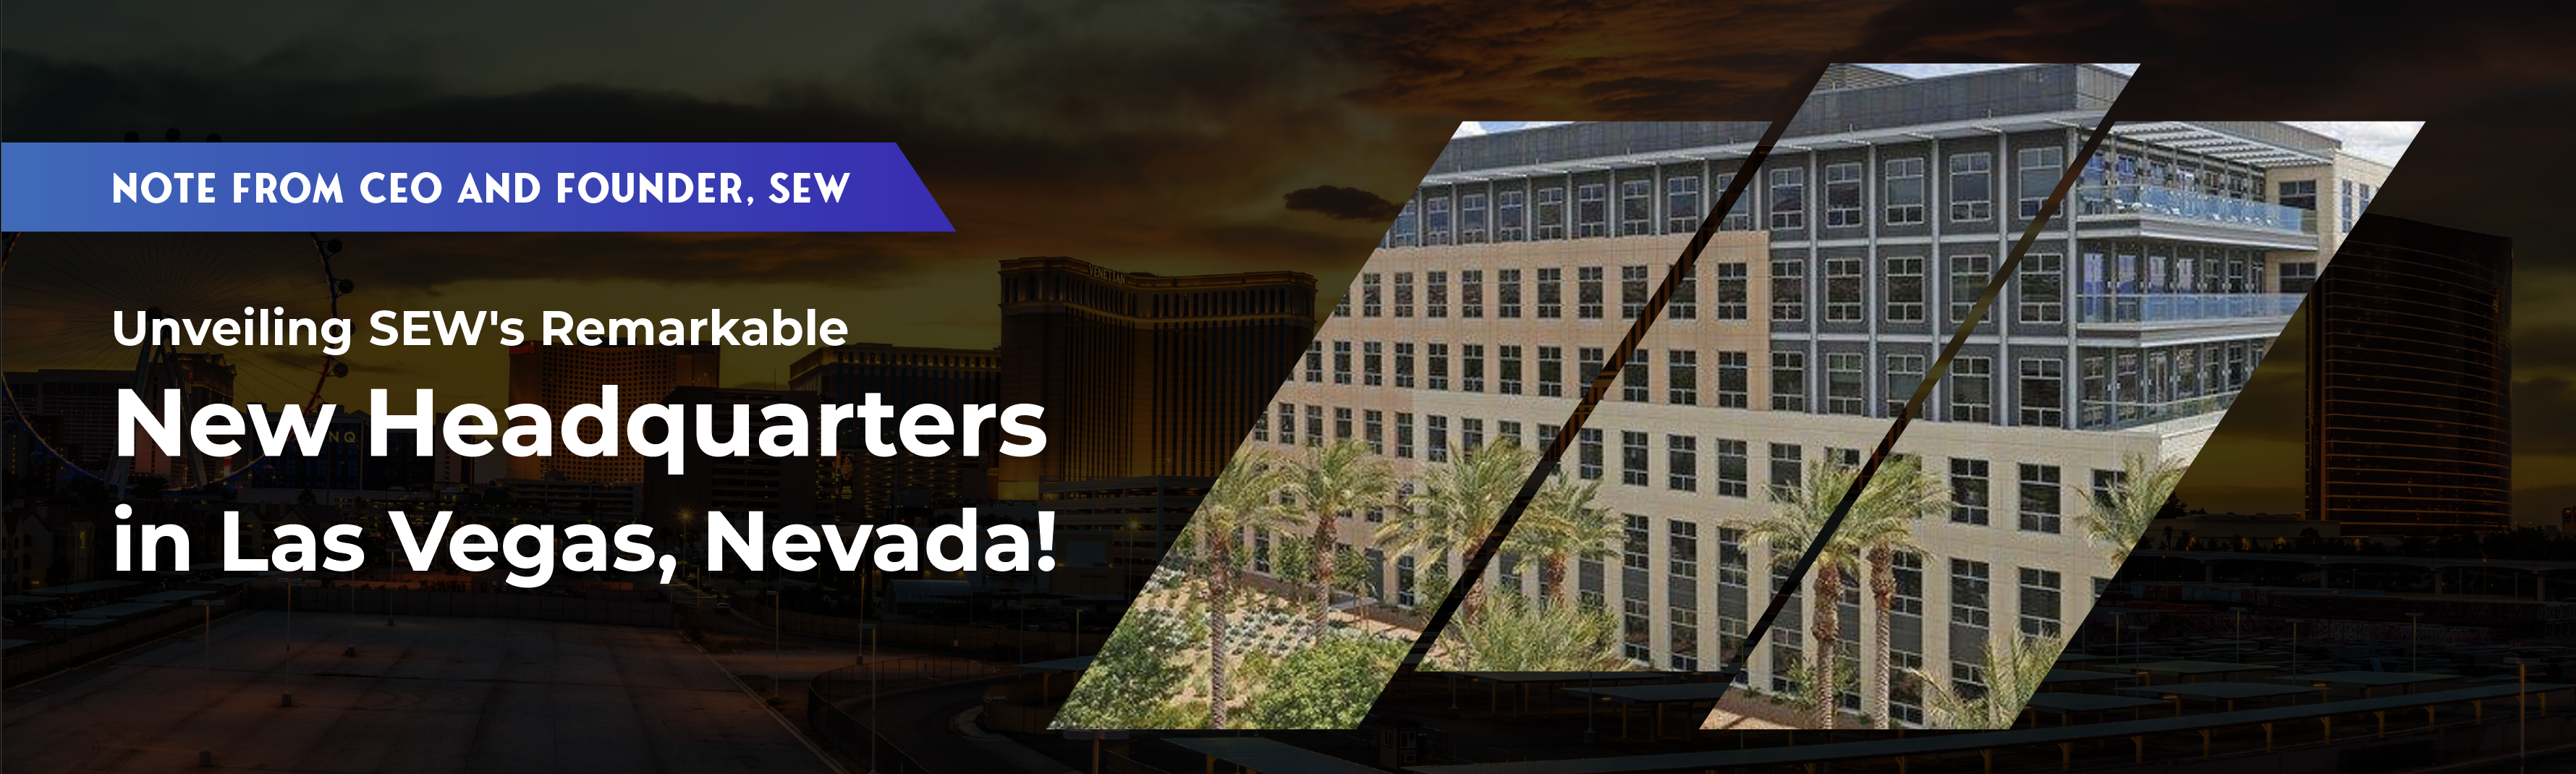 Expanding Horizons: Unveiling SEW's Remarkable New Headquarters in Las Vegas, Nevada!